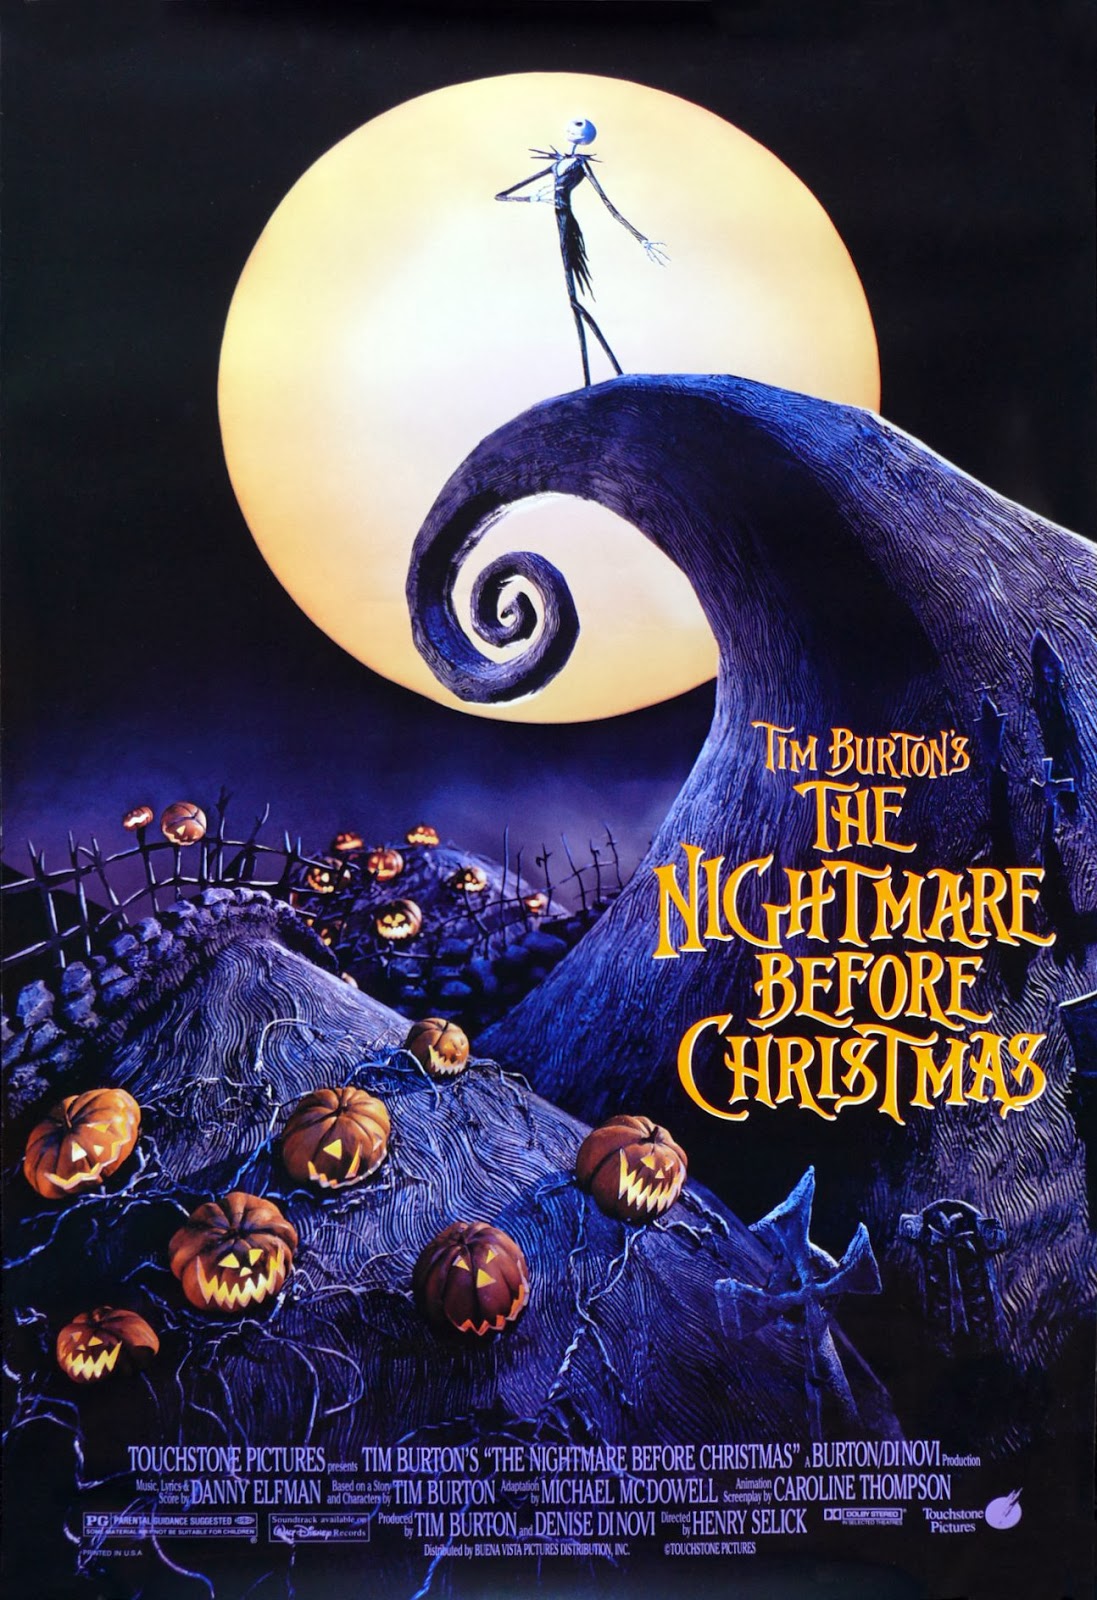 With Love -my obsession with films-: The Nightmare Before Christmas 4D ...